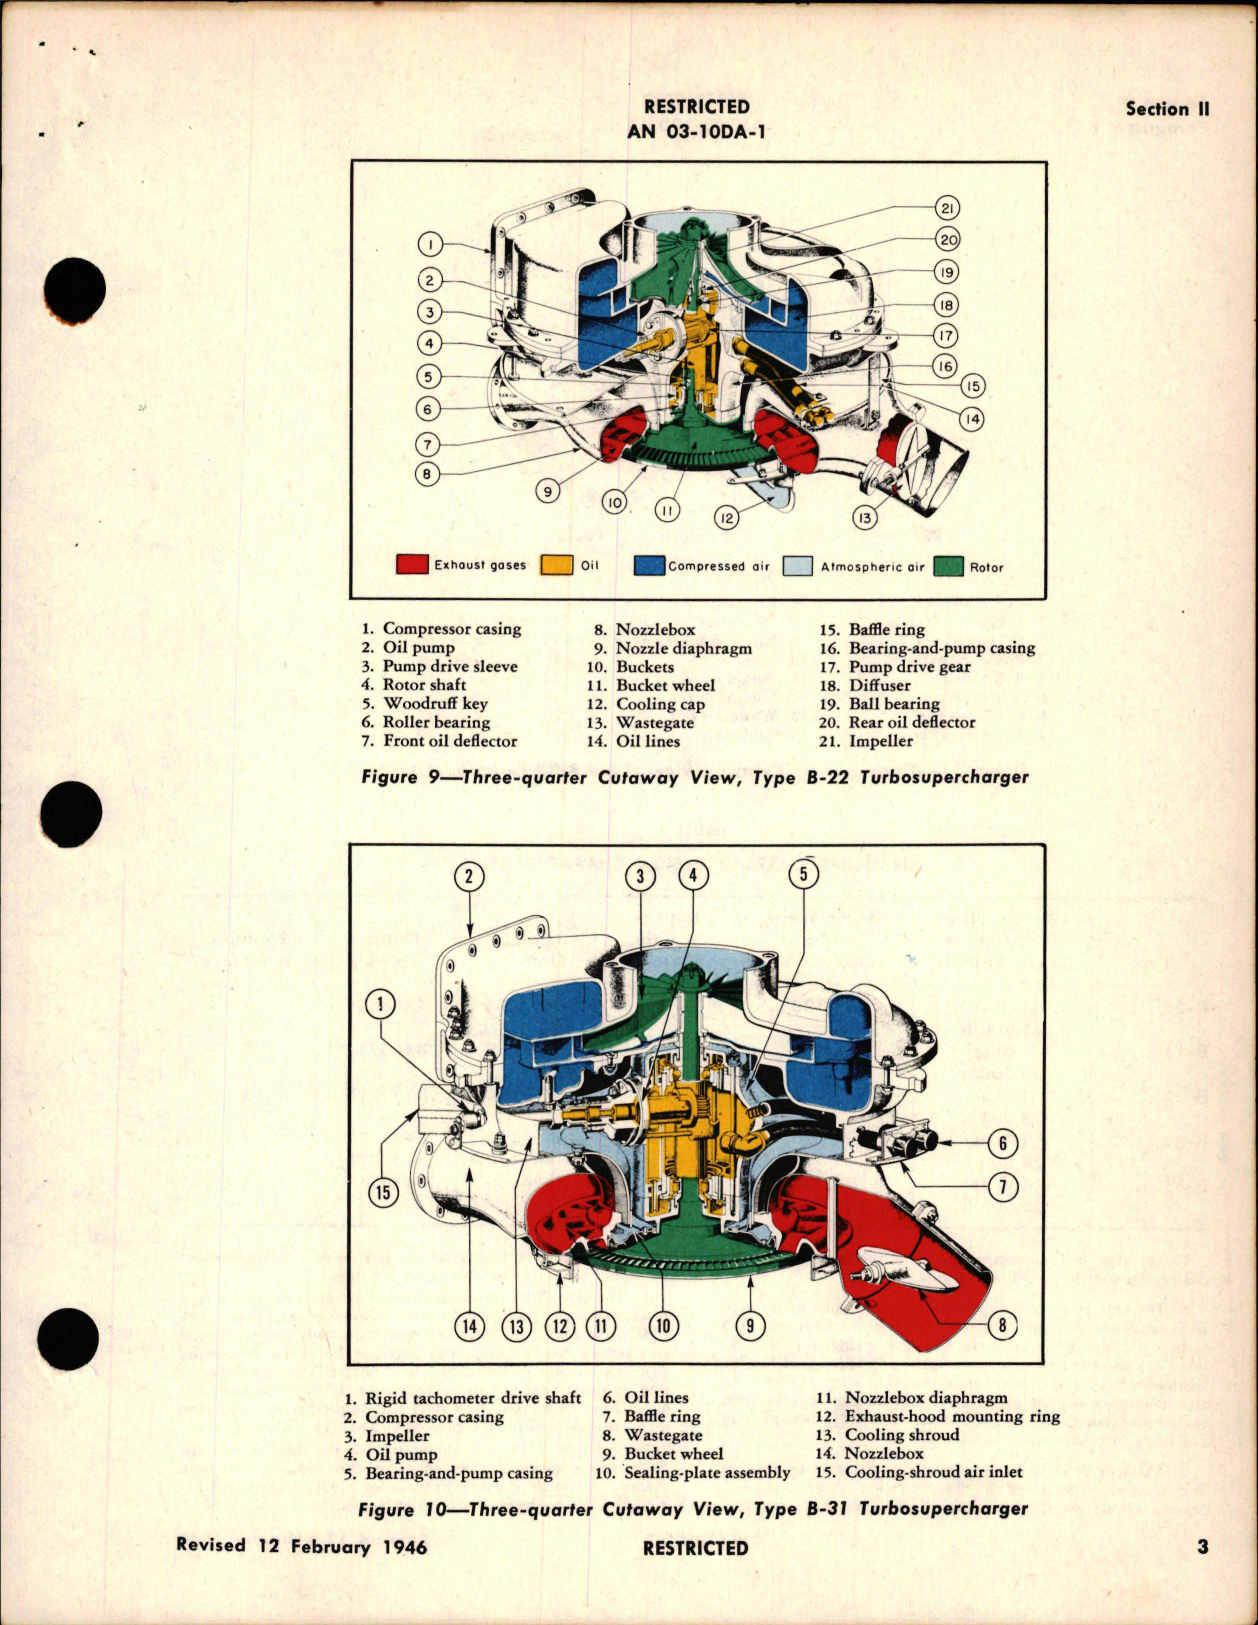 Sample page 9 from AirCorps Library document: Operation, Service and Overhaul Instructions with Parts Catalog for Turbosuperchargers - Types B-2, B-11, B-22, B-31, and B-33 